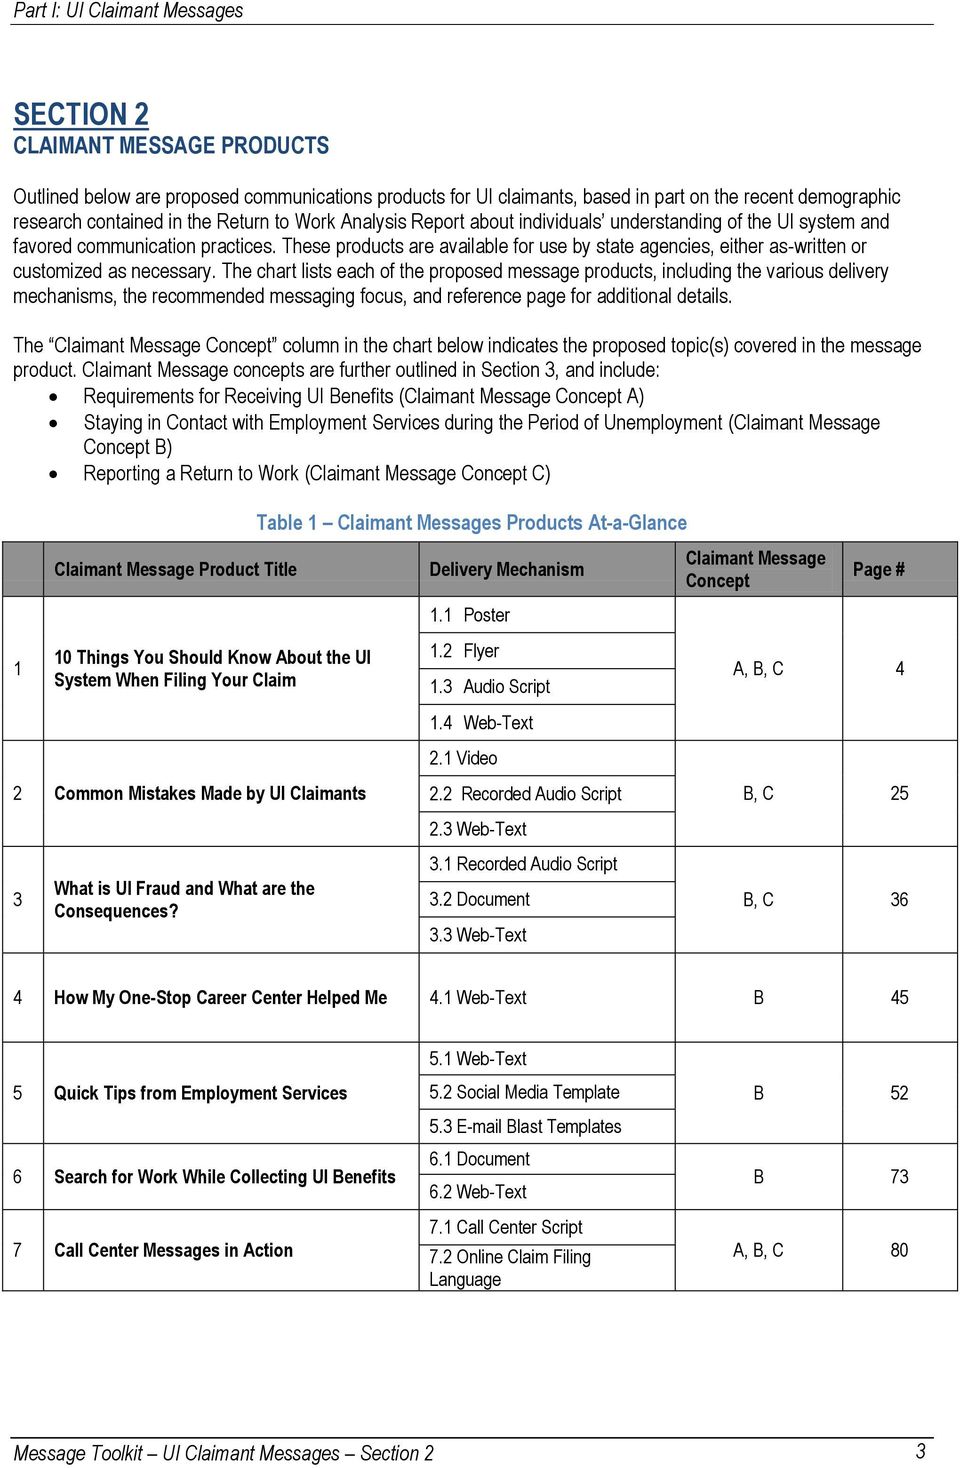 The chart lists each of the proposed message products, including the various delivery mechanisms, the recommended messaging focus, and reference page for additional details.